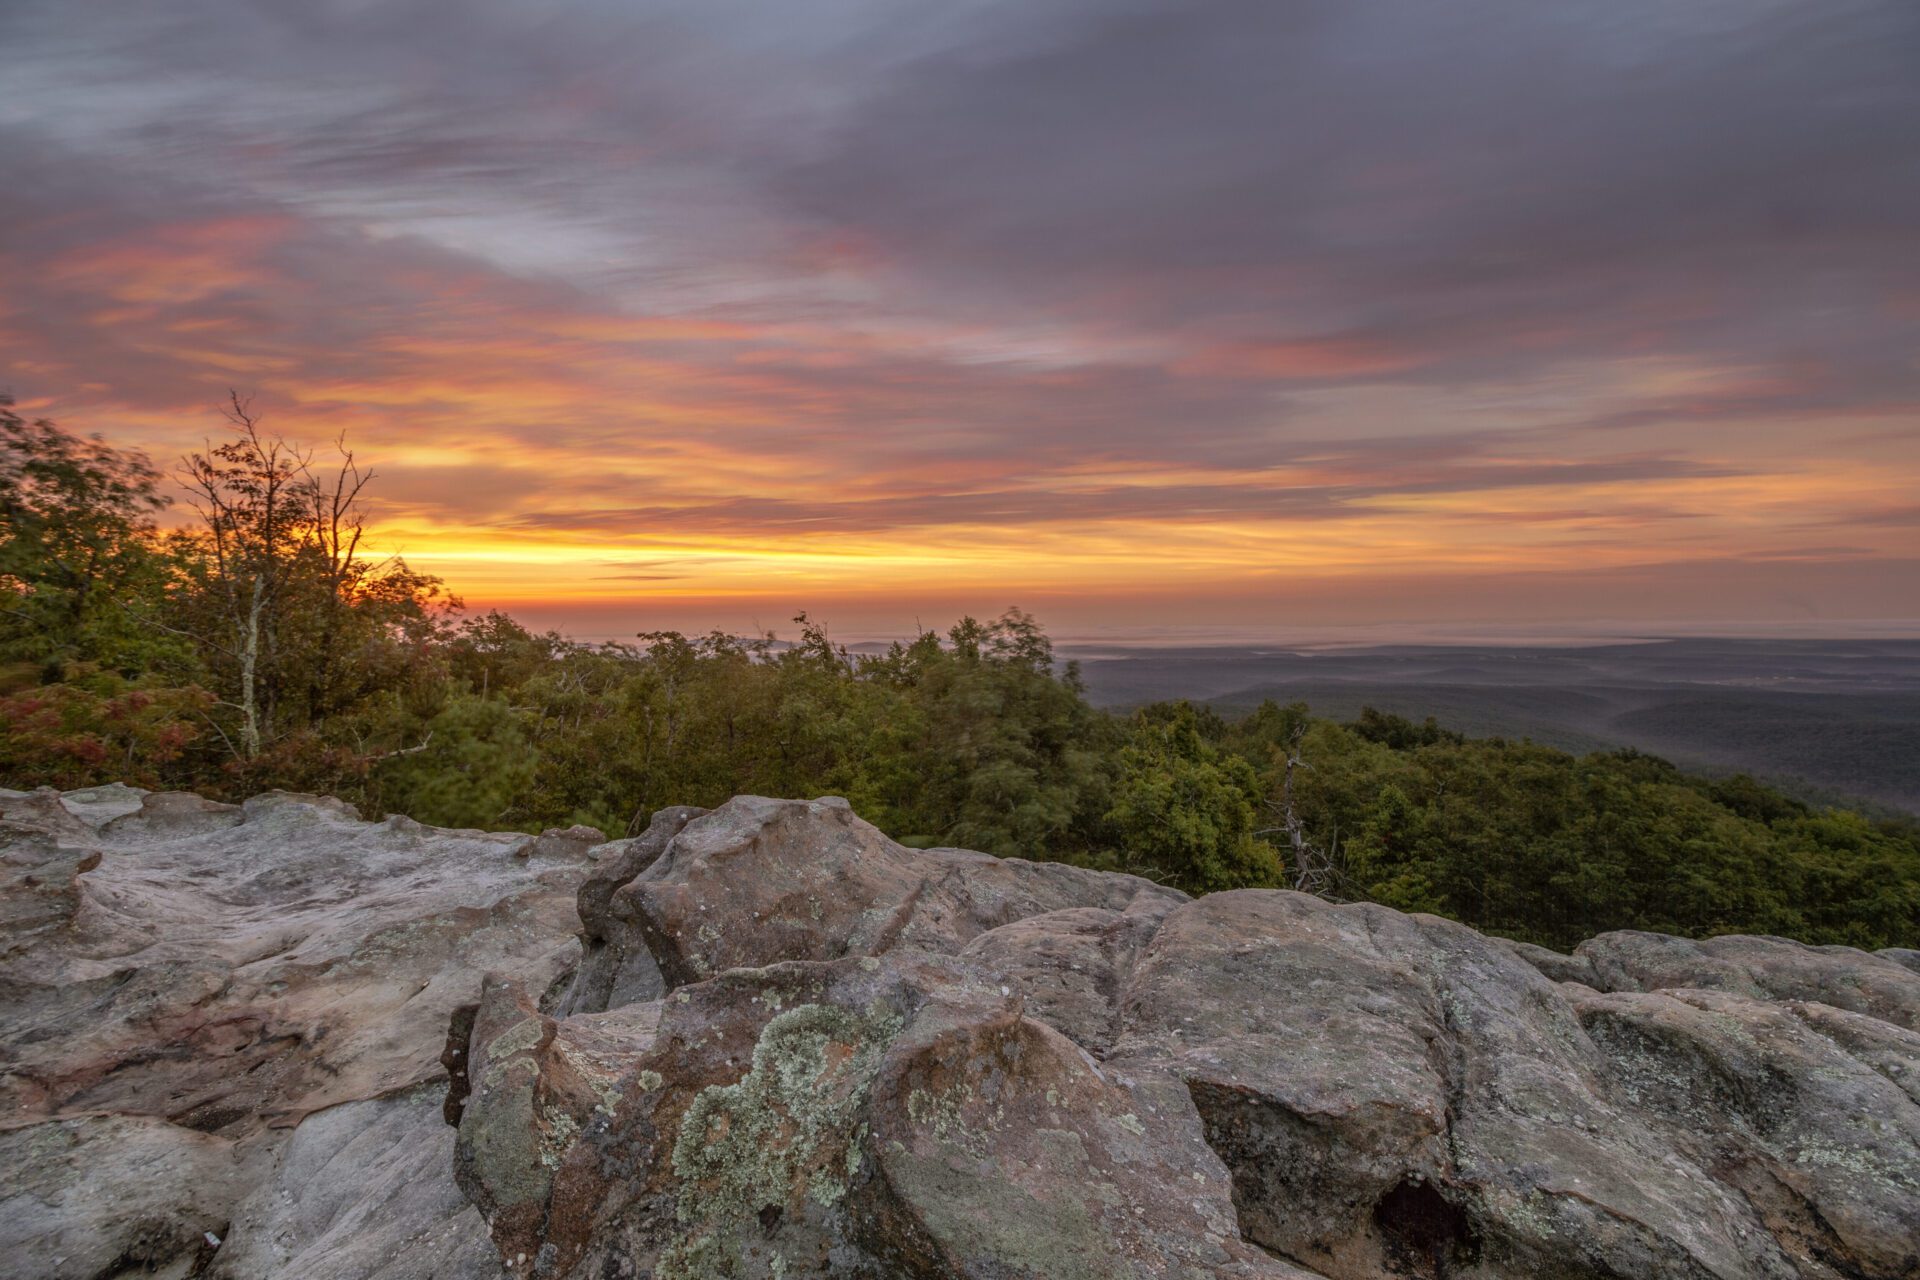 Black Mountain, Cumberland Trail State Park - Photo by Chuck Sutherland